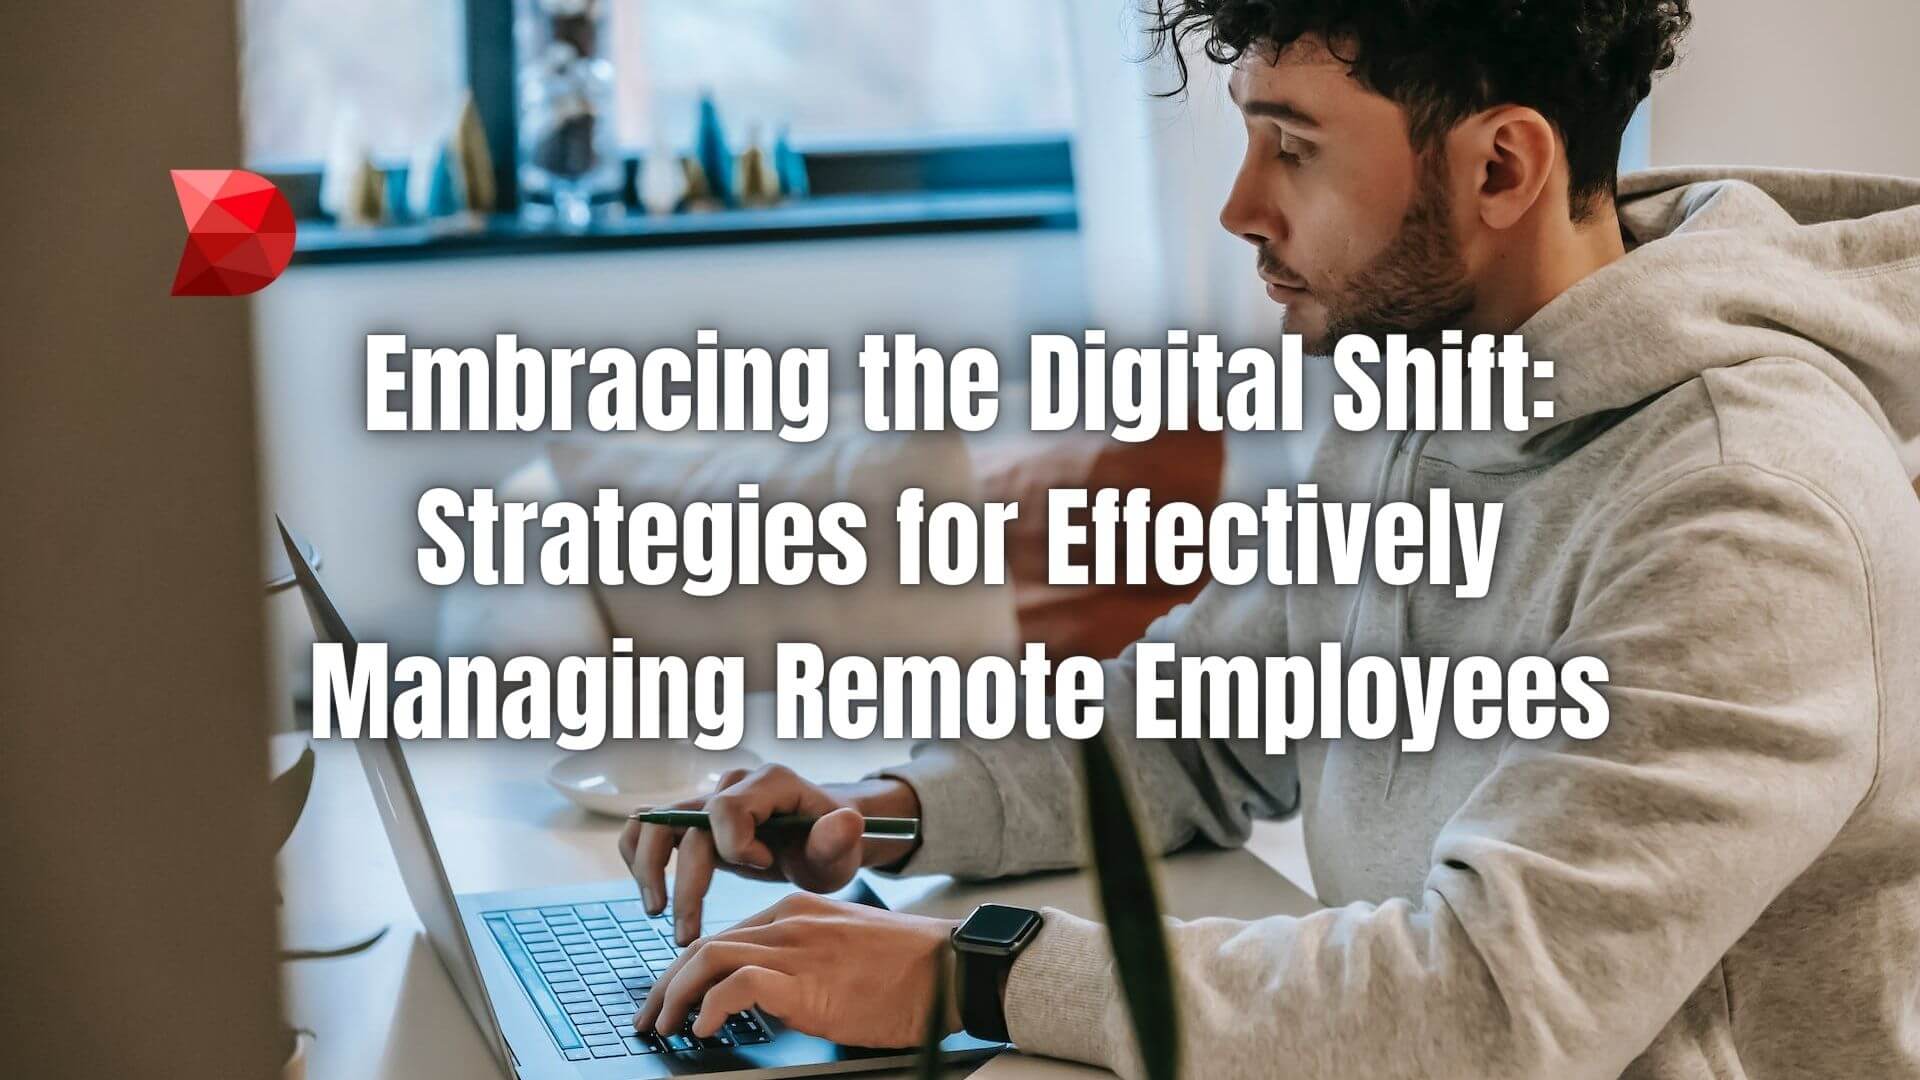 Empower your leadership skills with this guide on managing remote employees. Maximize productivity and engagement. Learn more!